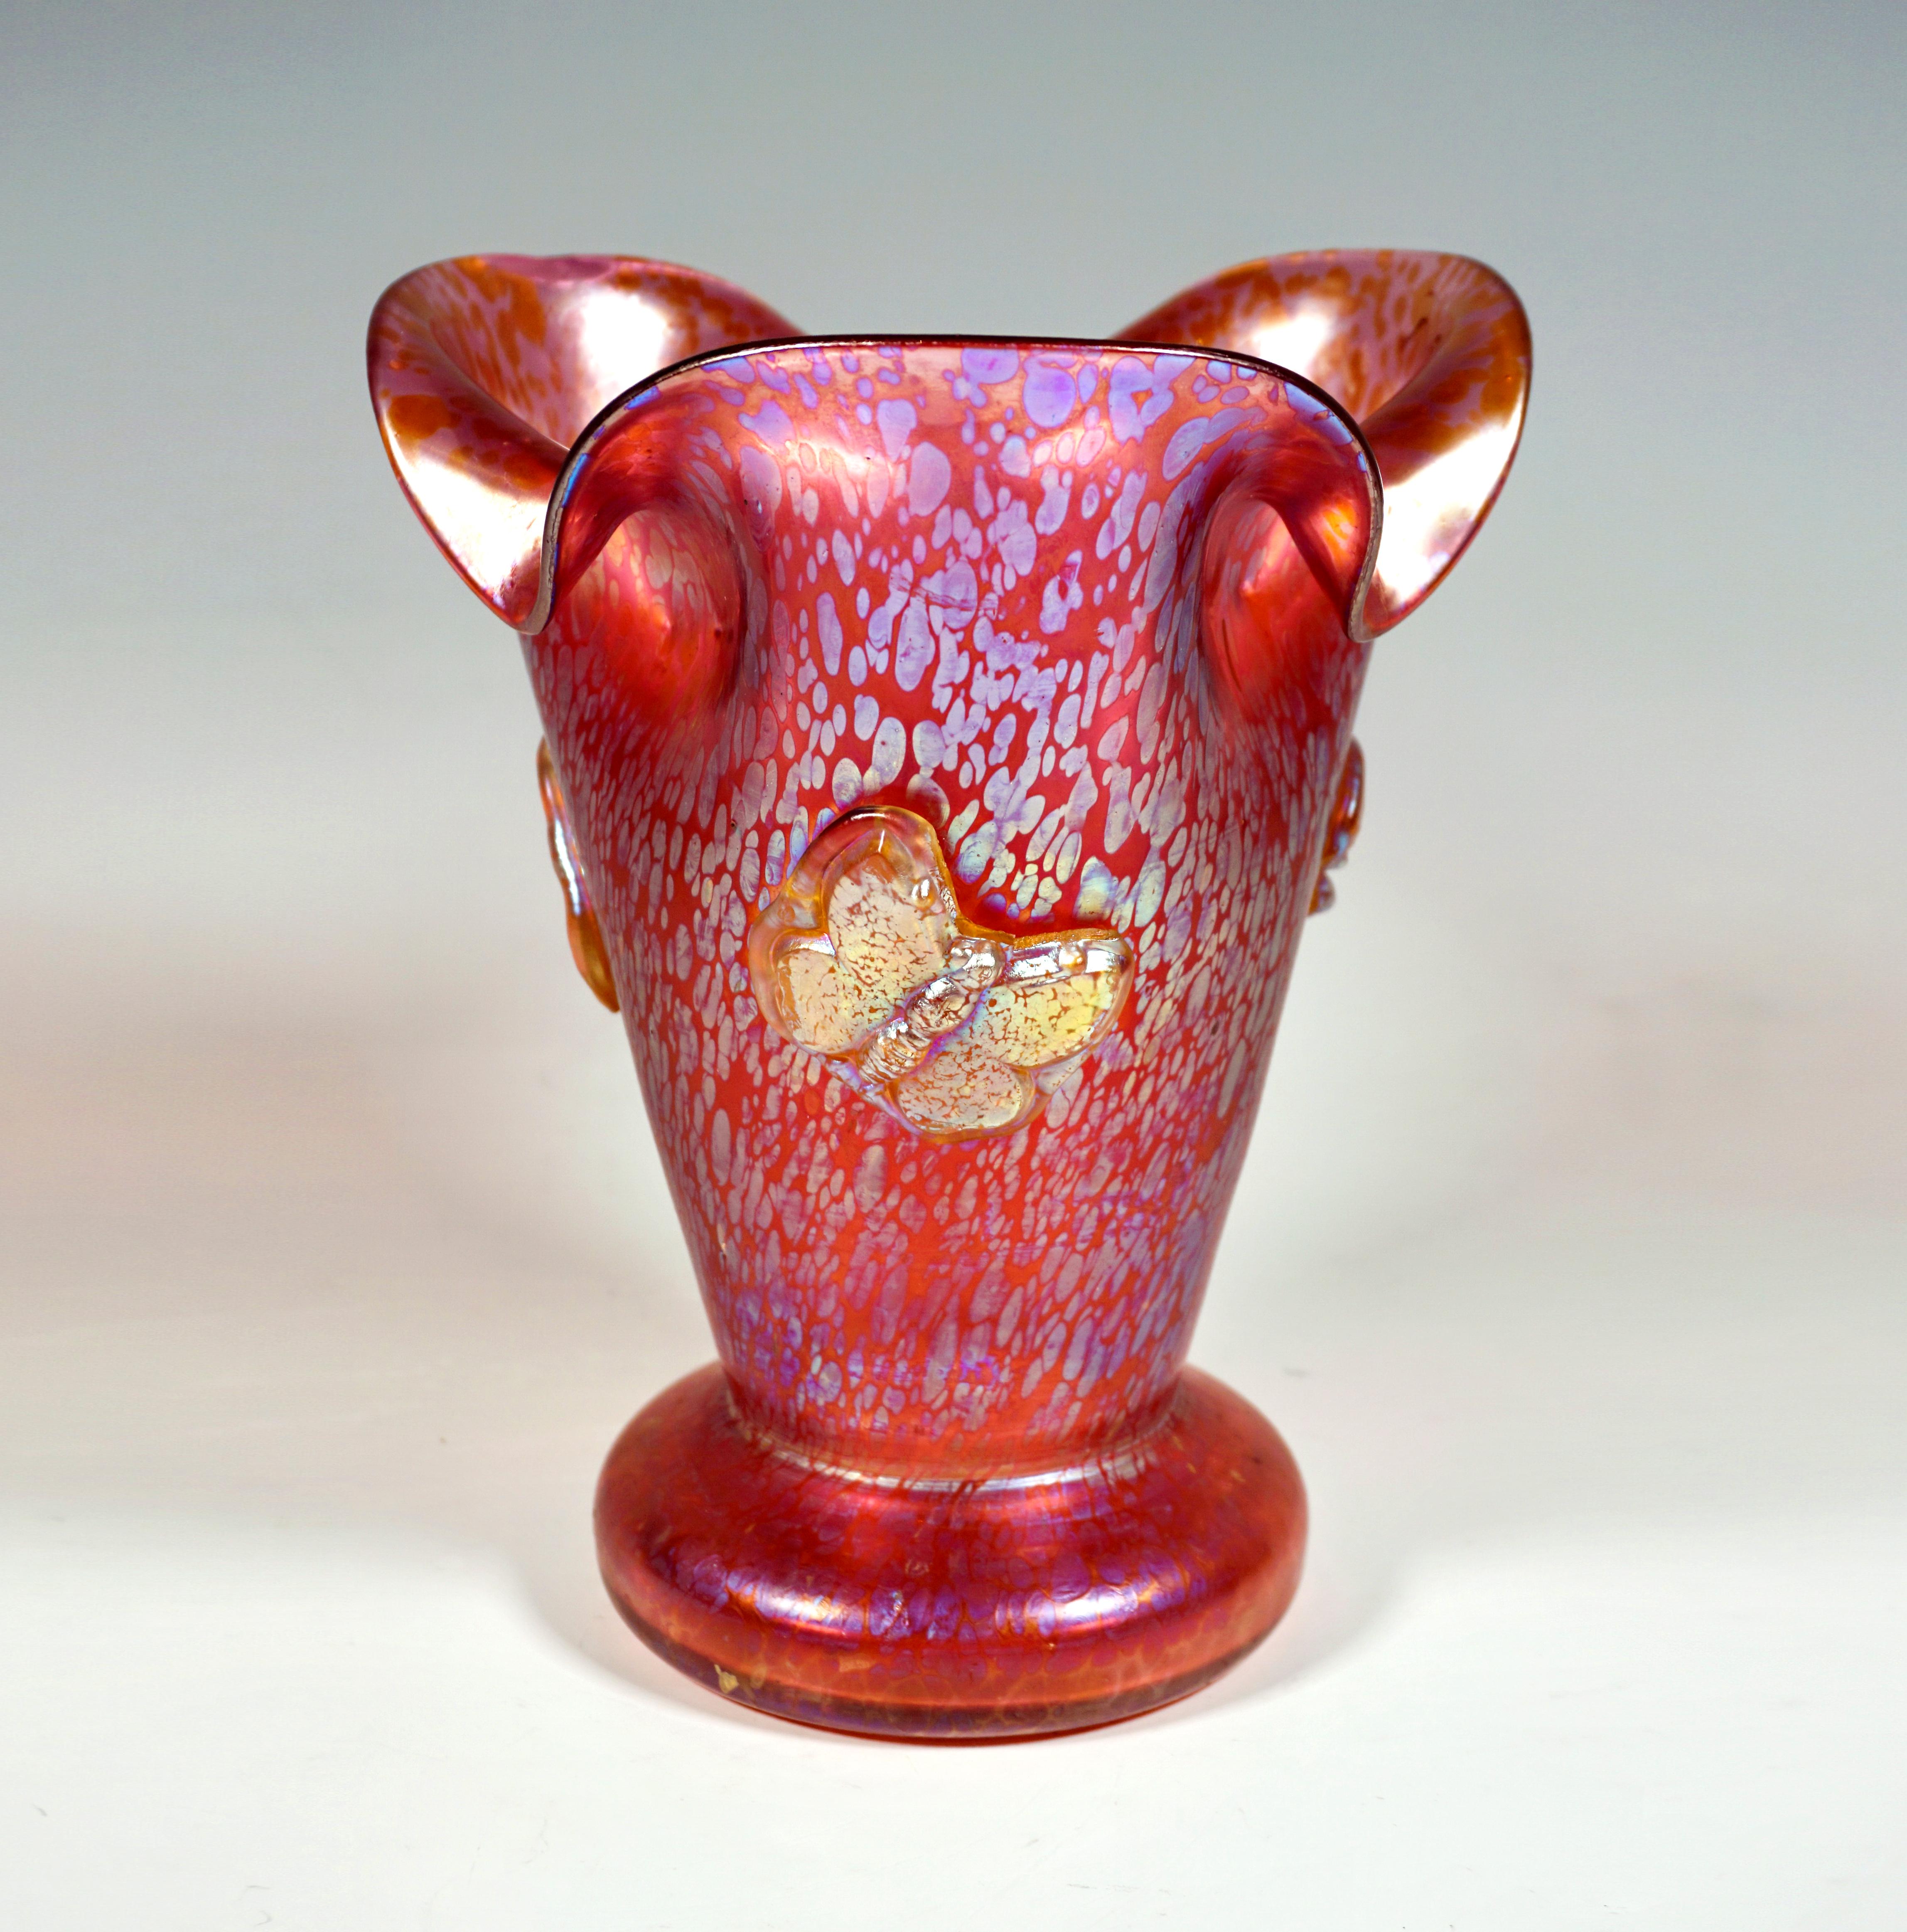 Finest Bohemian Art Nouveau glass vase:
Mould-blown vase with torus-shaped stand and funnel-shaped attached wall with trefoil-shaped, lobed mouth rim, wall and inside satin-finished, polished pontil with cut signature 'Loetz Austria'.

Shape: